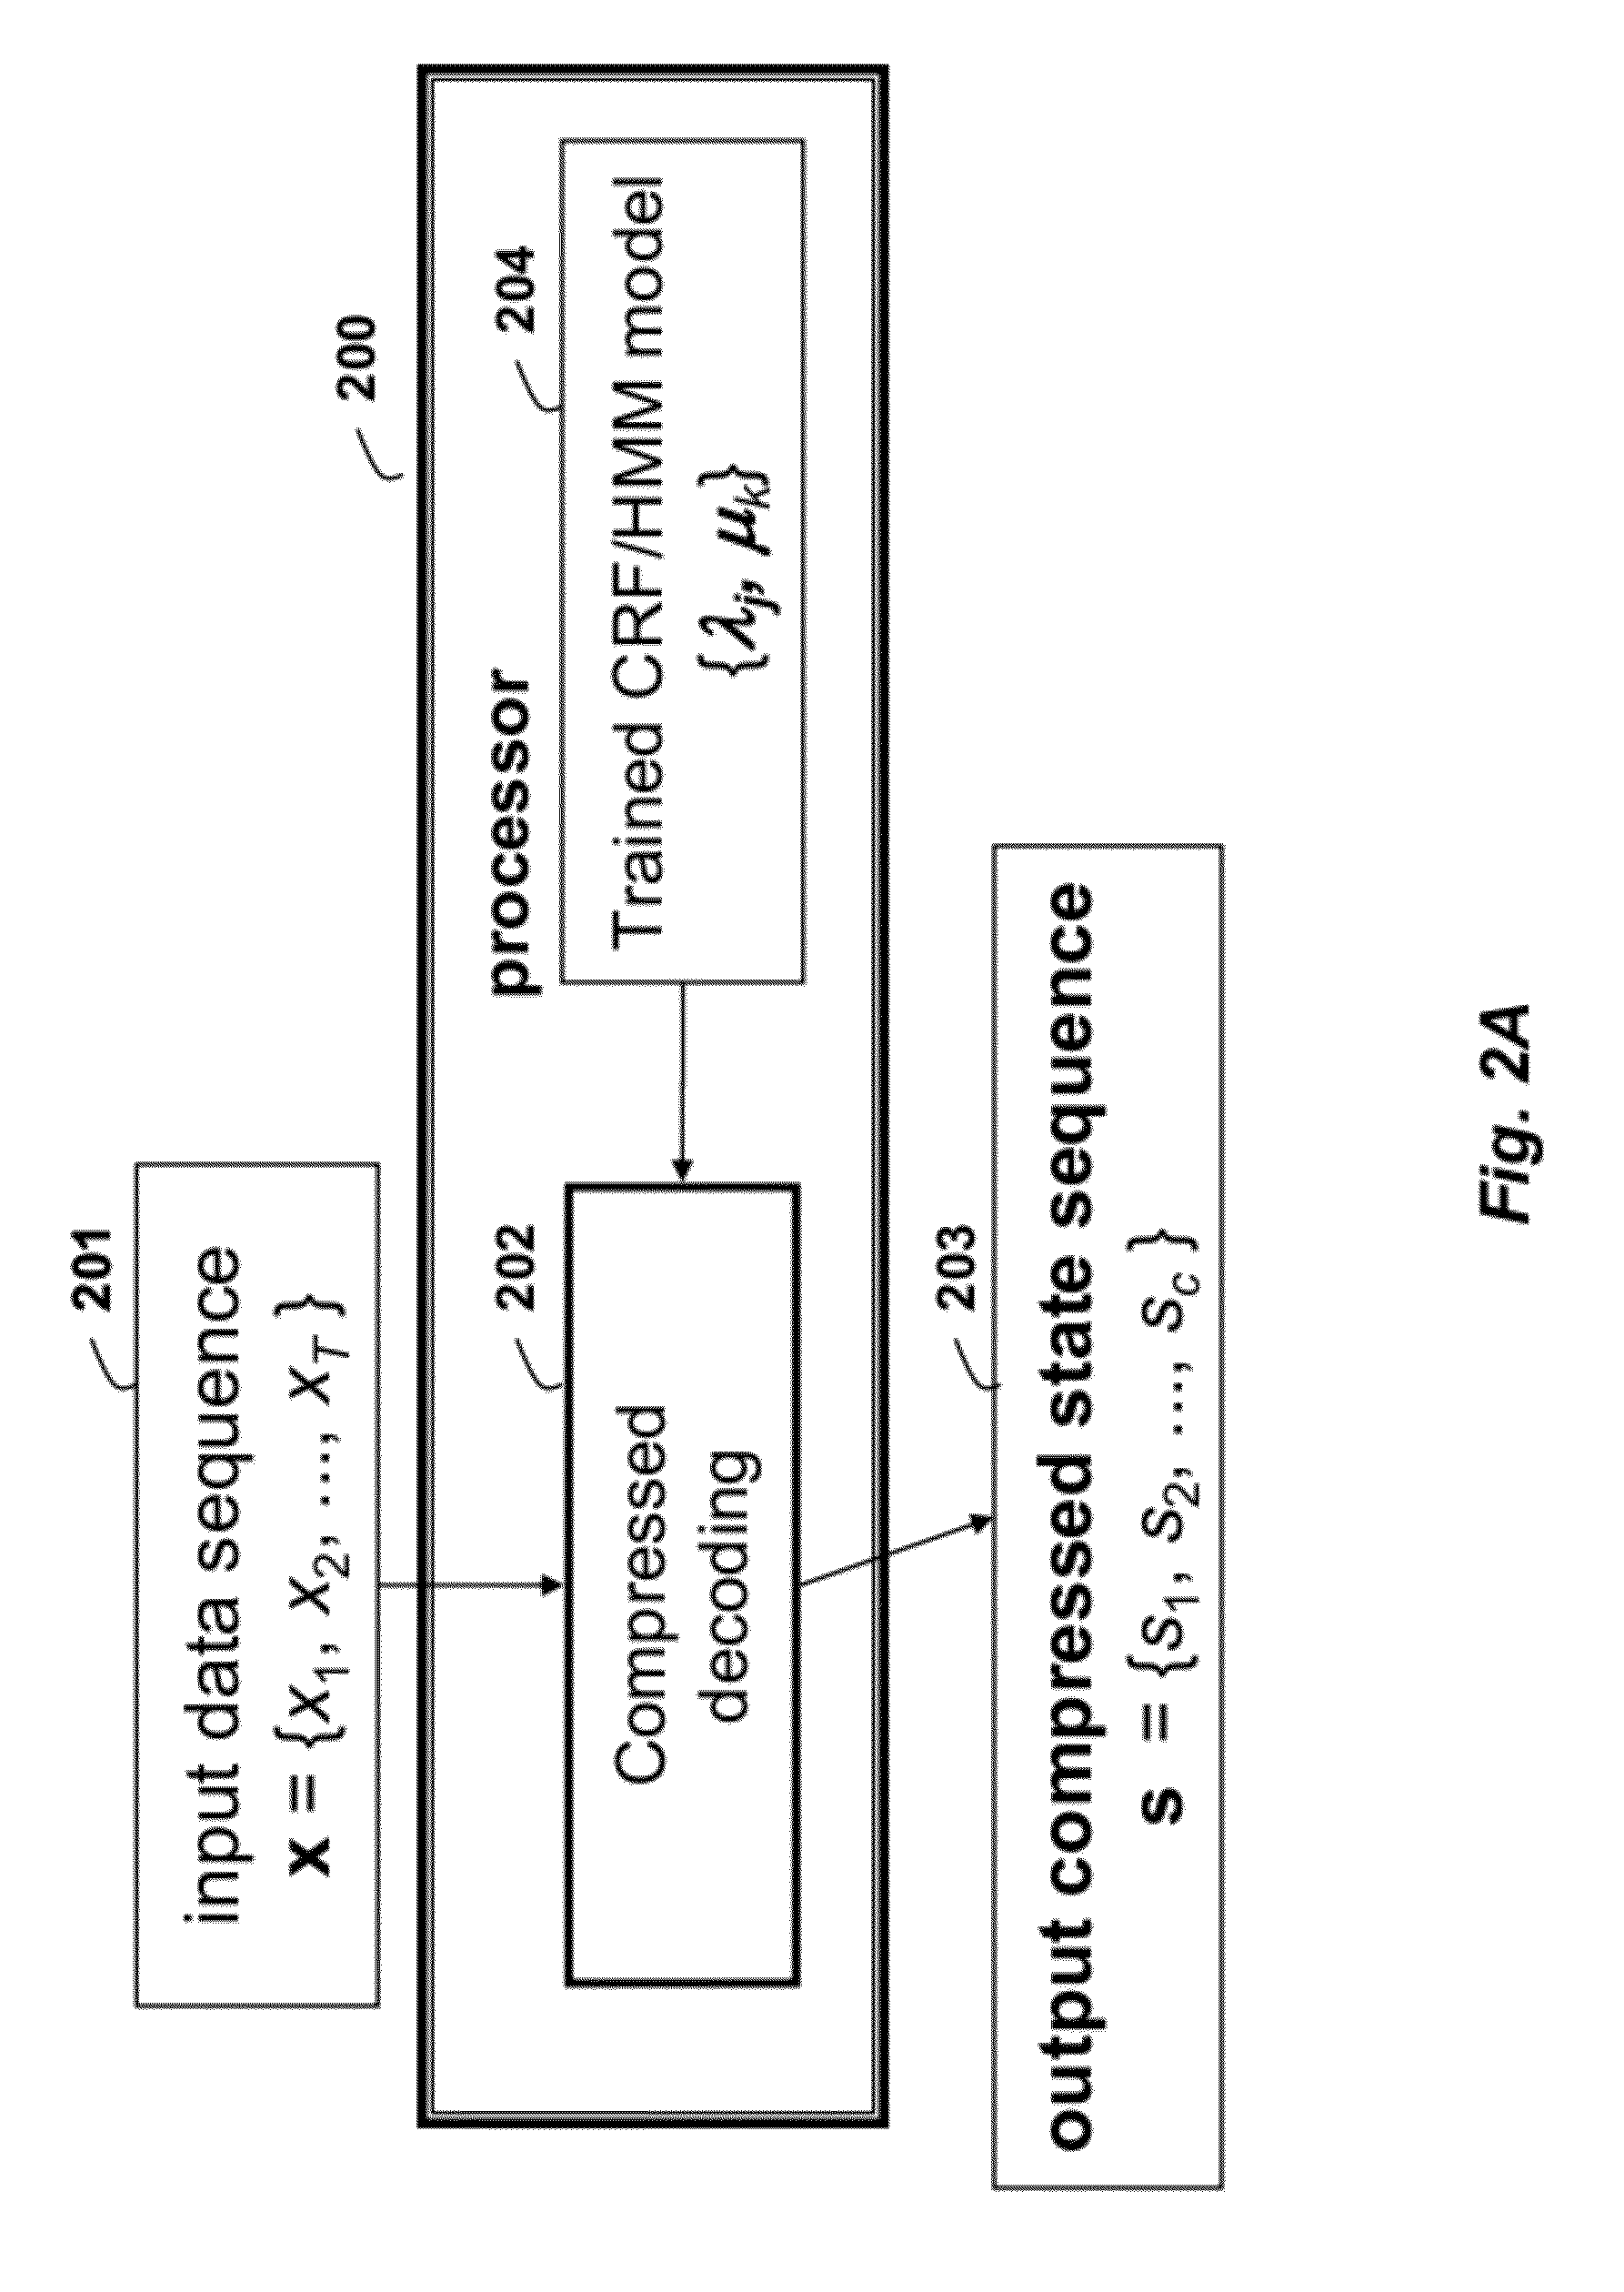 Method for Determining Compressed State Sequences